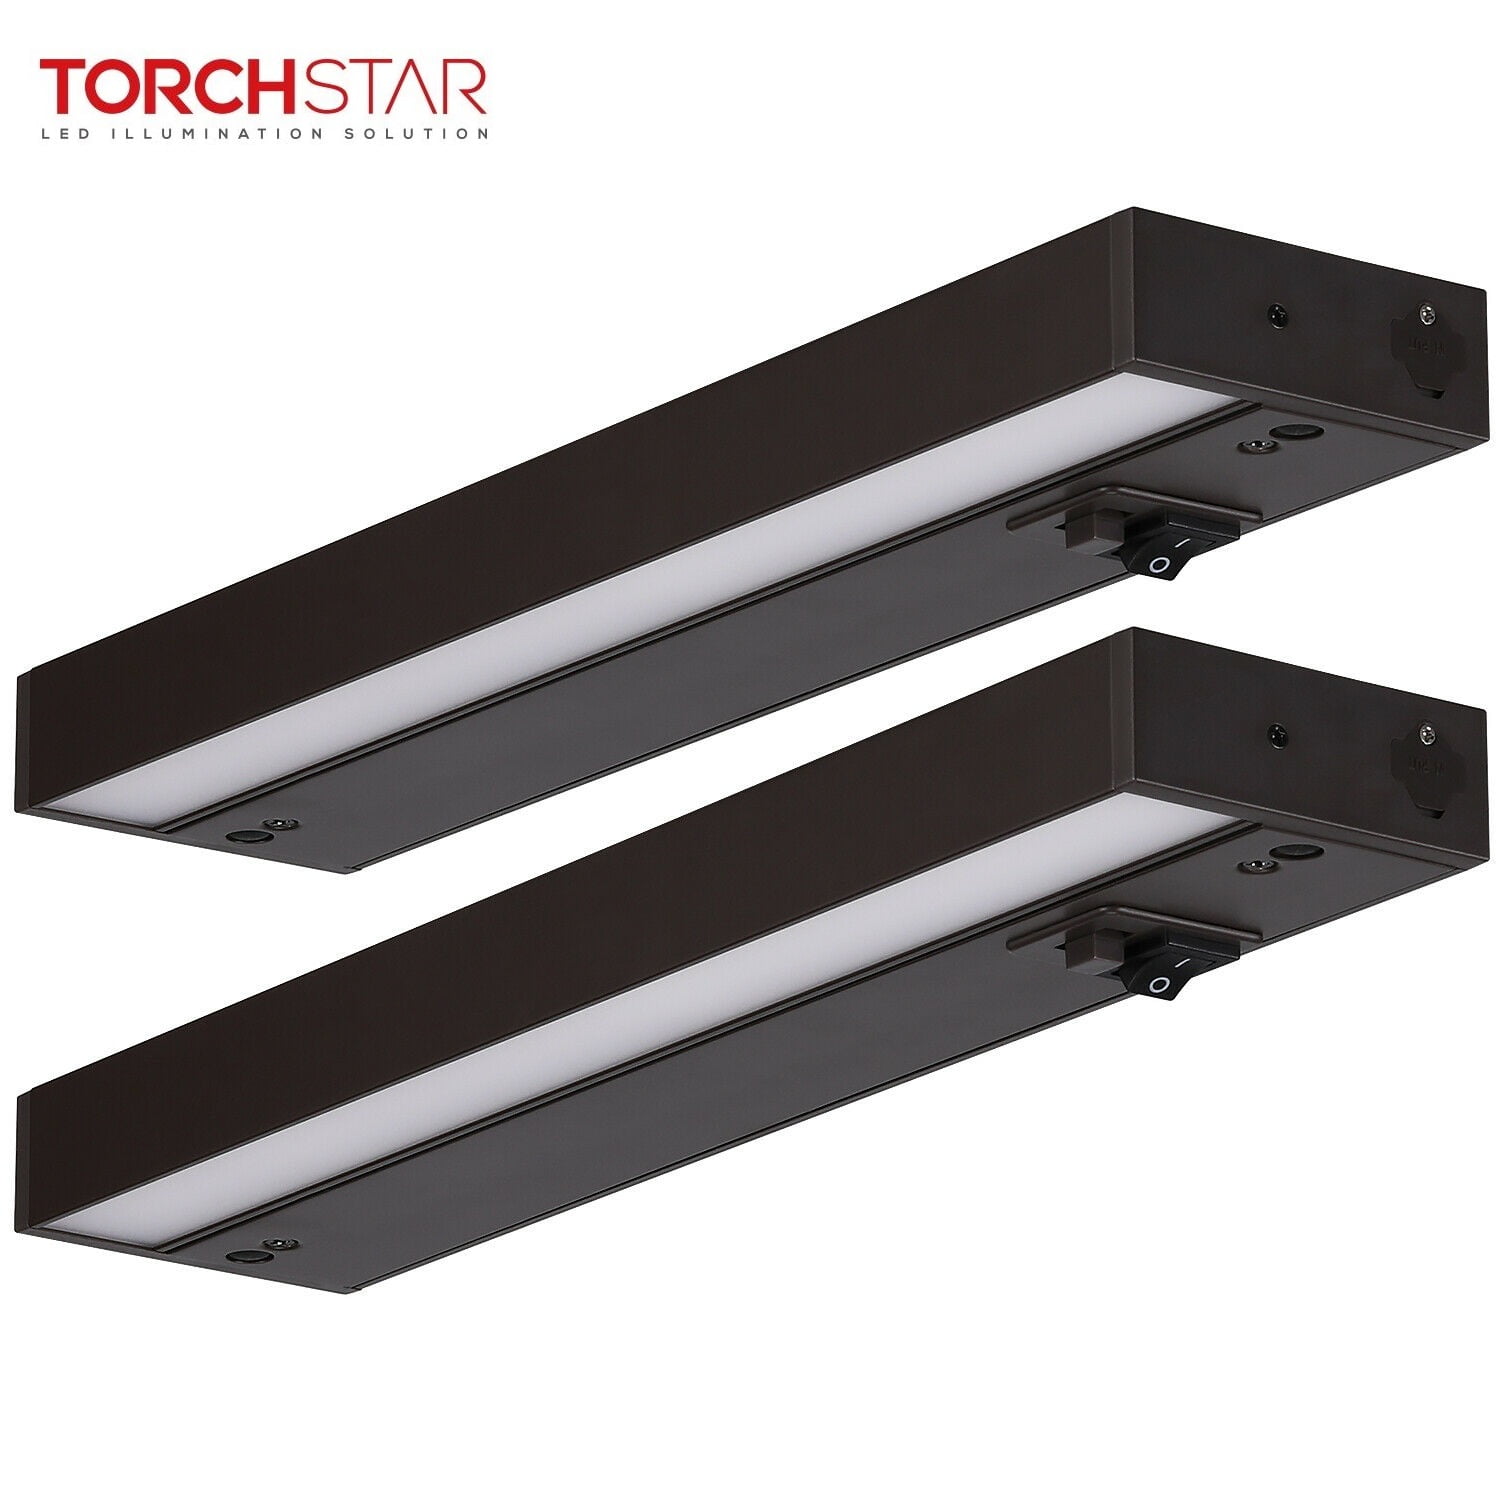 TORCHSTAR LED Under Cabinet Light, Hardwired or Plug-in, 12 Inch, 60LM/W,  Dimmable, Linkable, Color Levels, On/Off Switch Included, ETL  Energy  Star, 120V, Dark Brown, Pack of